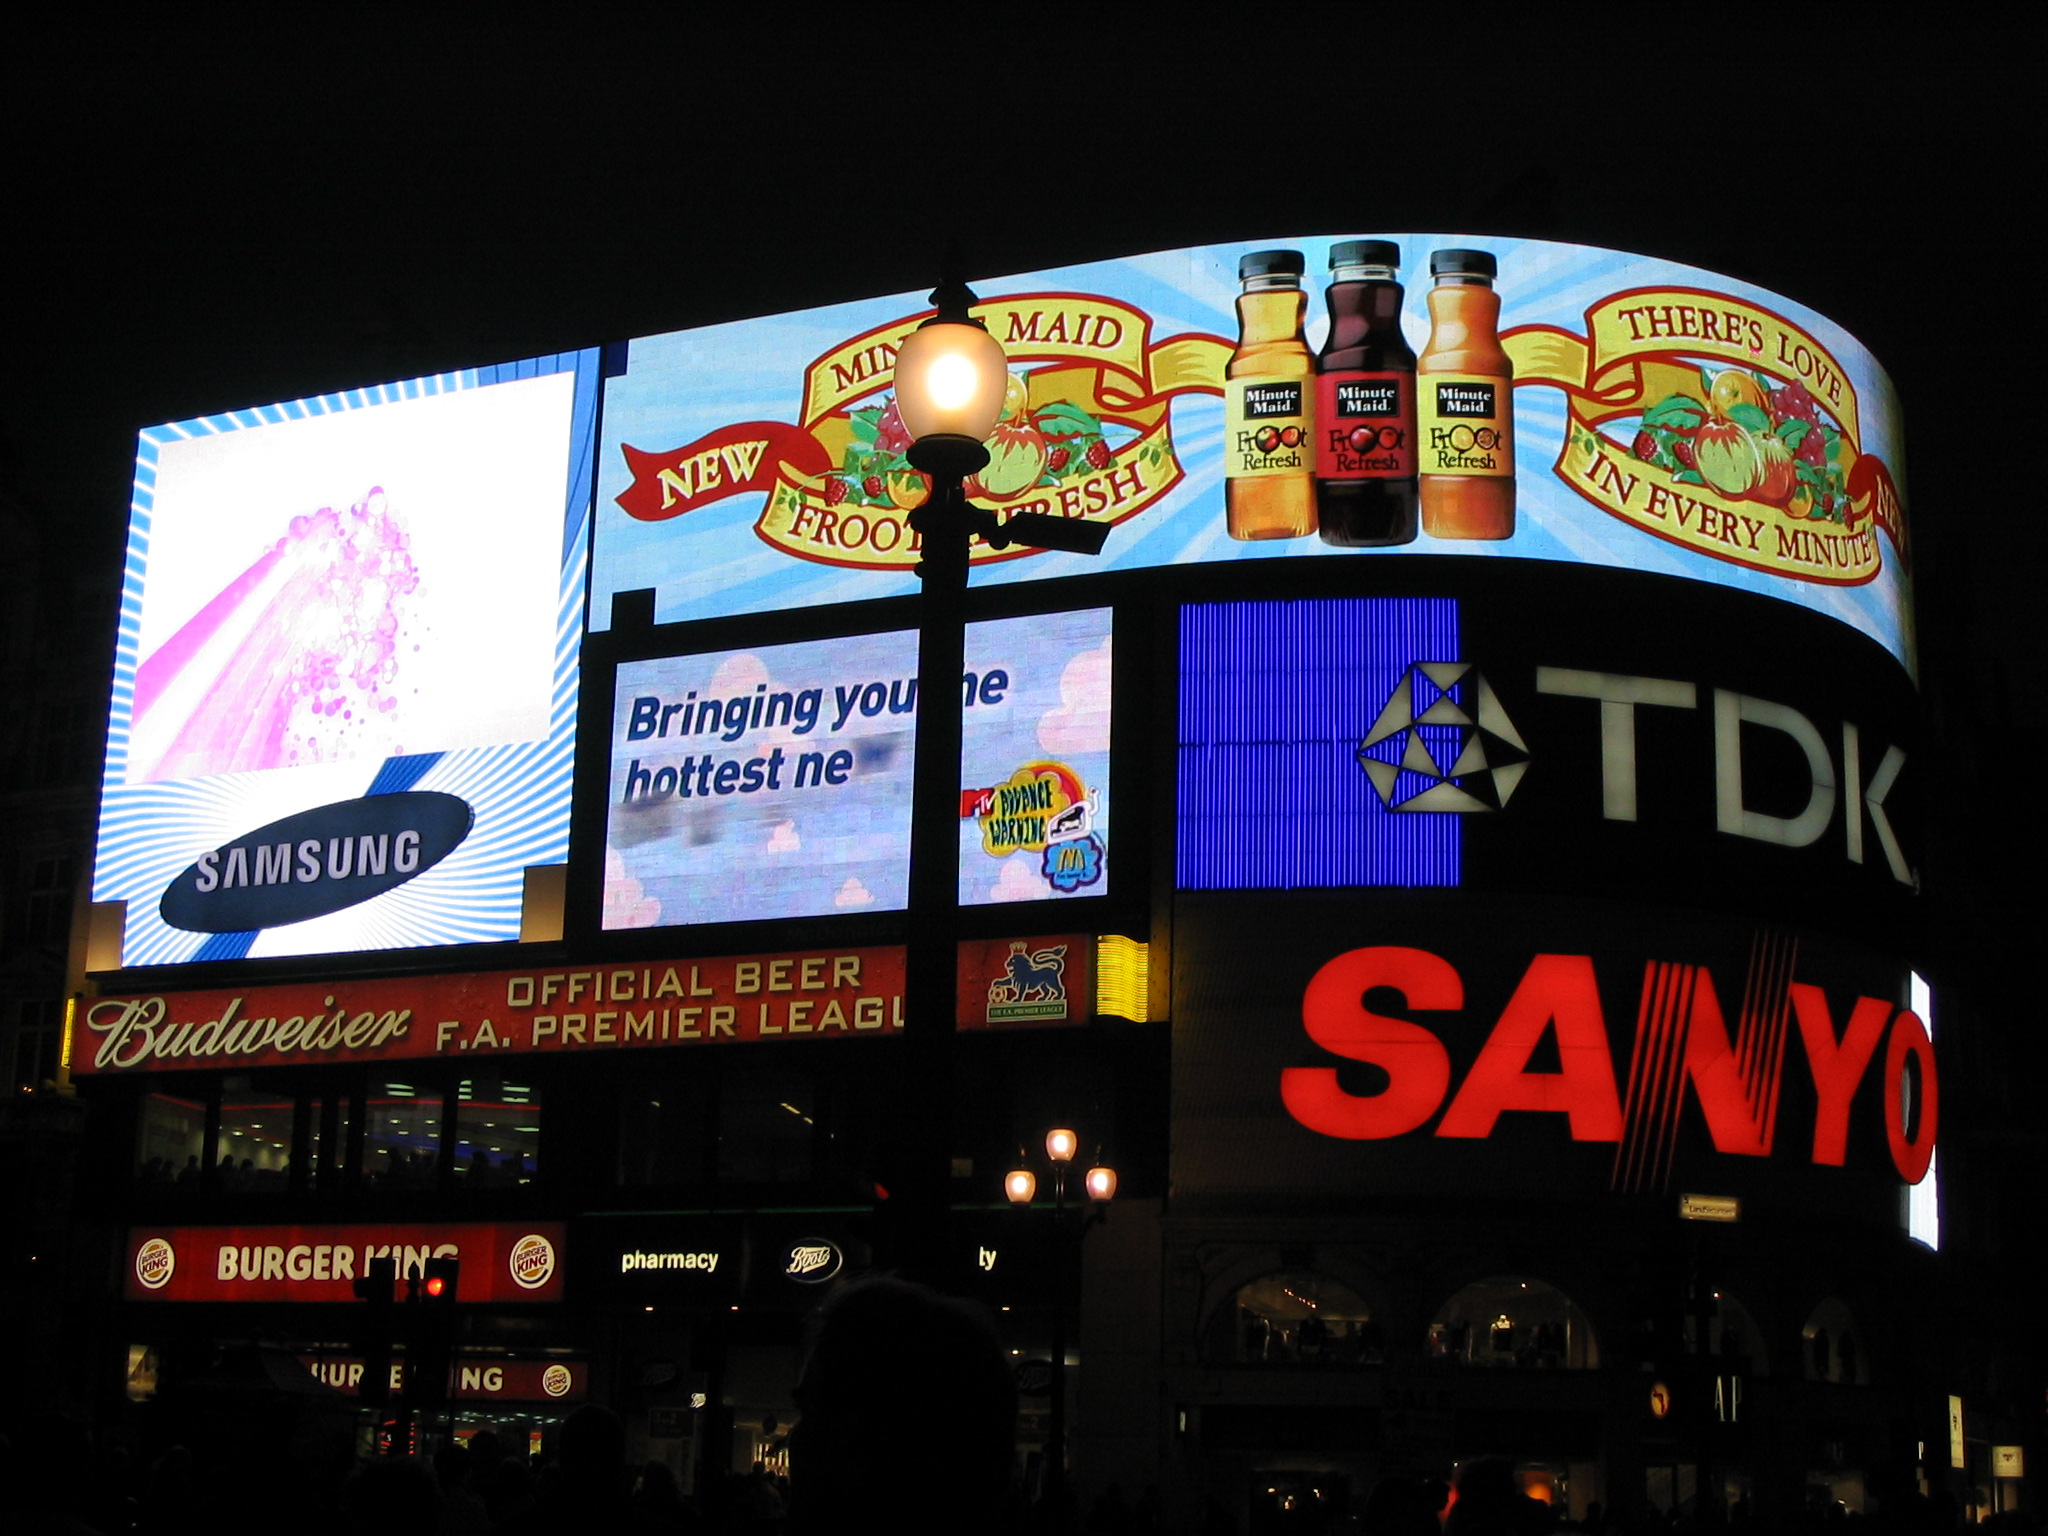 Piccadilly's Signs